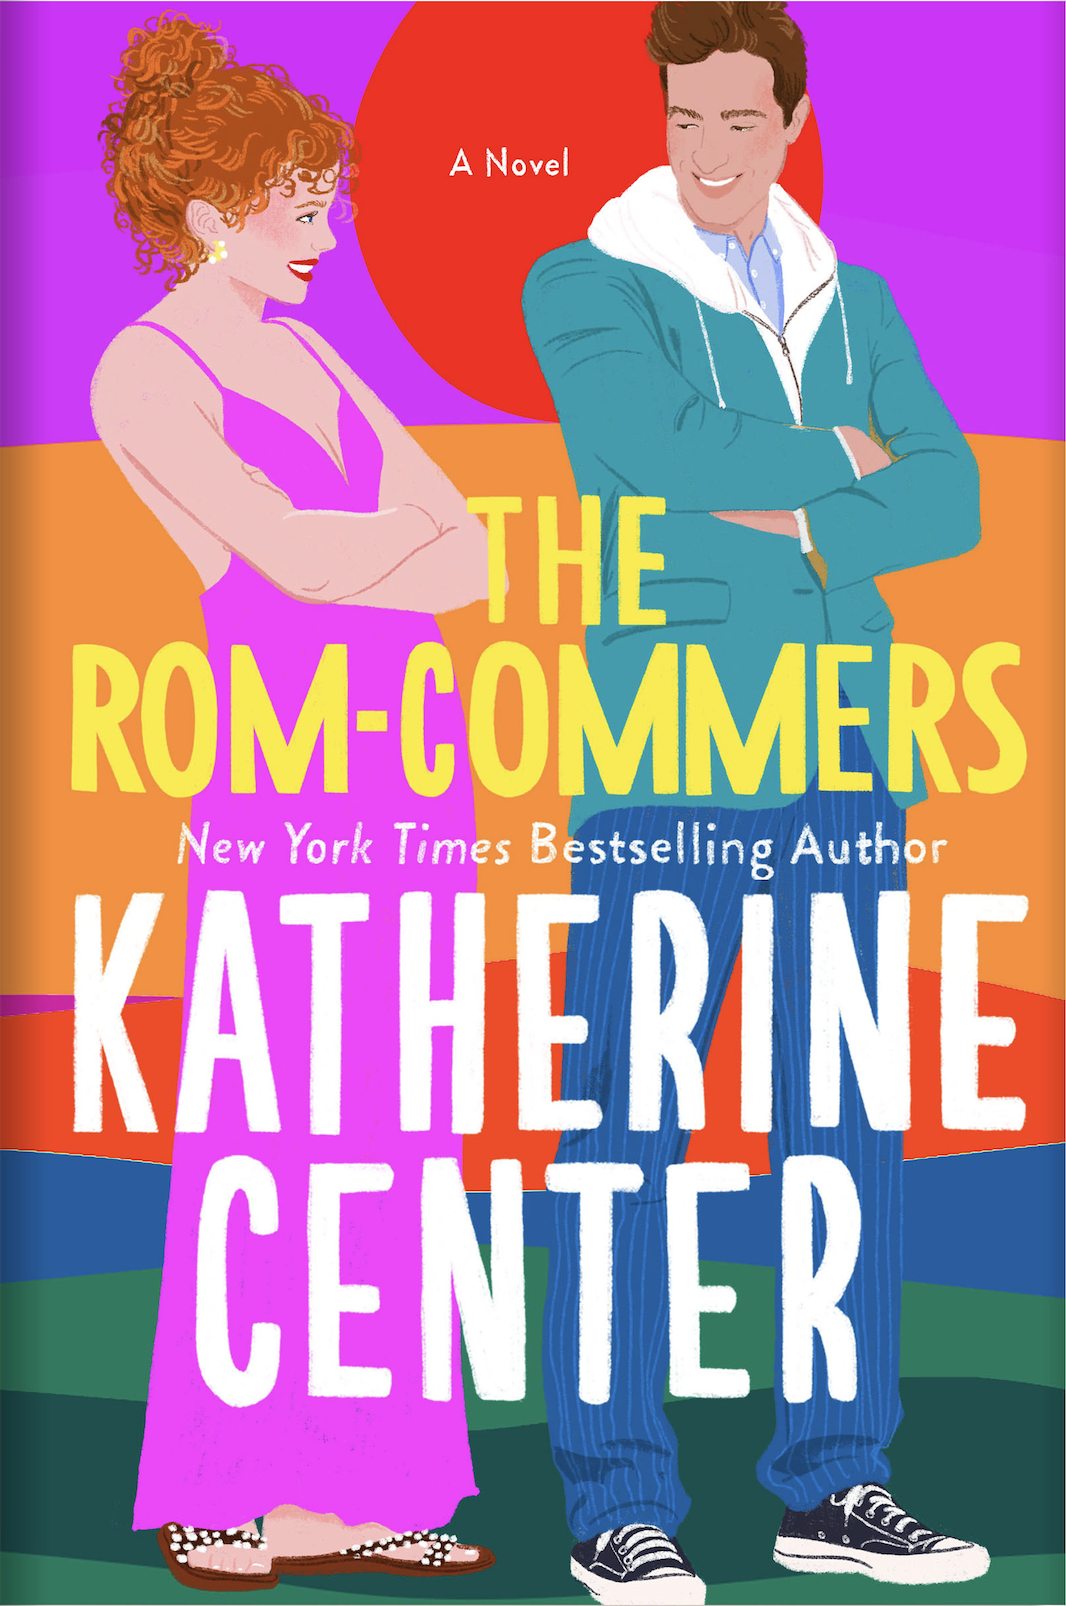 Image for "The Rom-Commers"